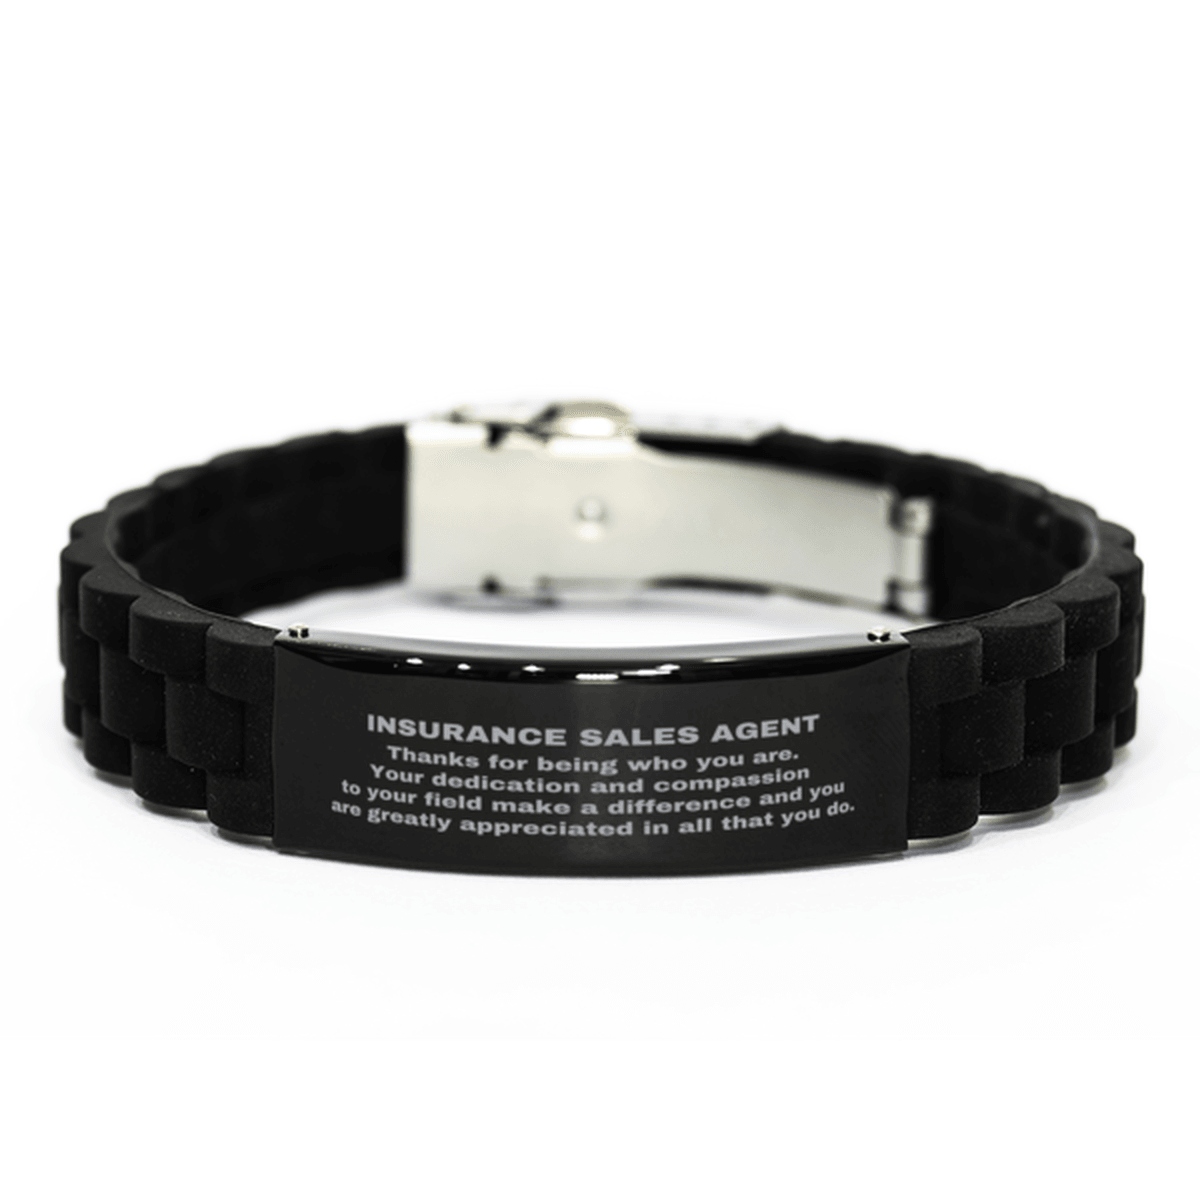 Insurance Sales Agent Black Glidelock Clasp Engraved Bracelet - Thanks for being who you are - Birthday Christmas Jewelry Gifts Coworkers Colleague Boss